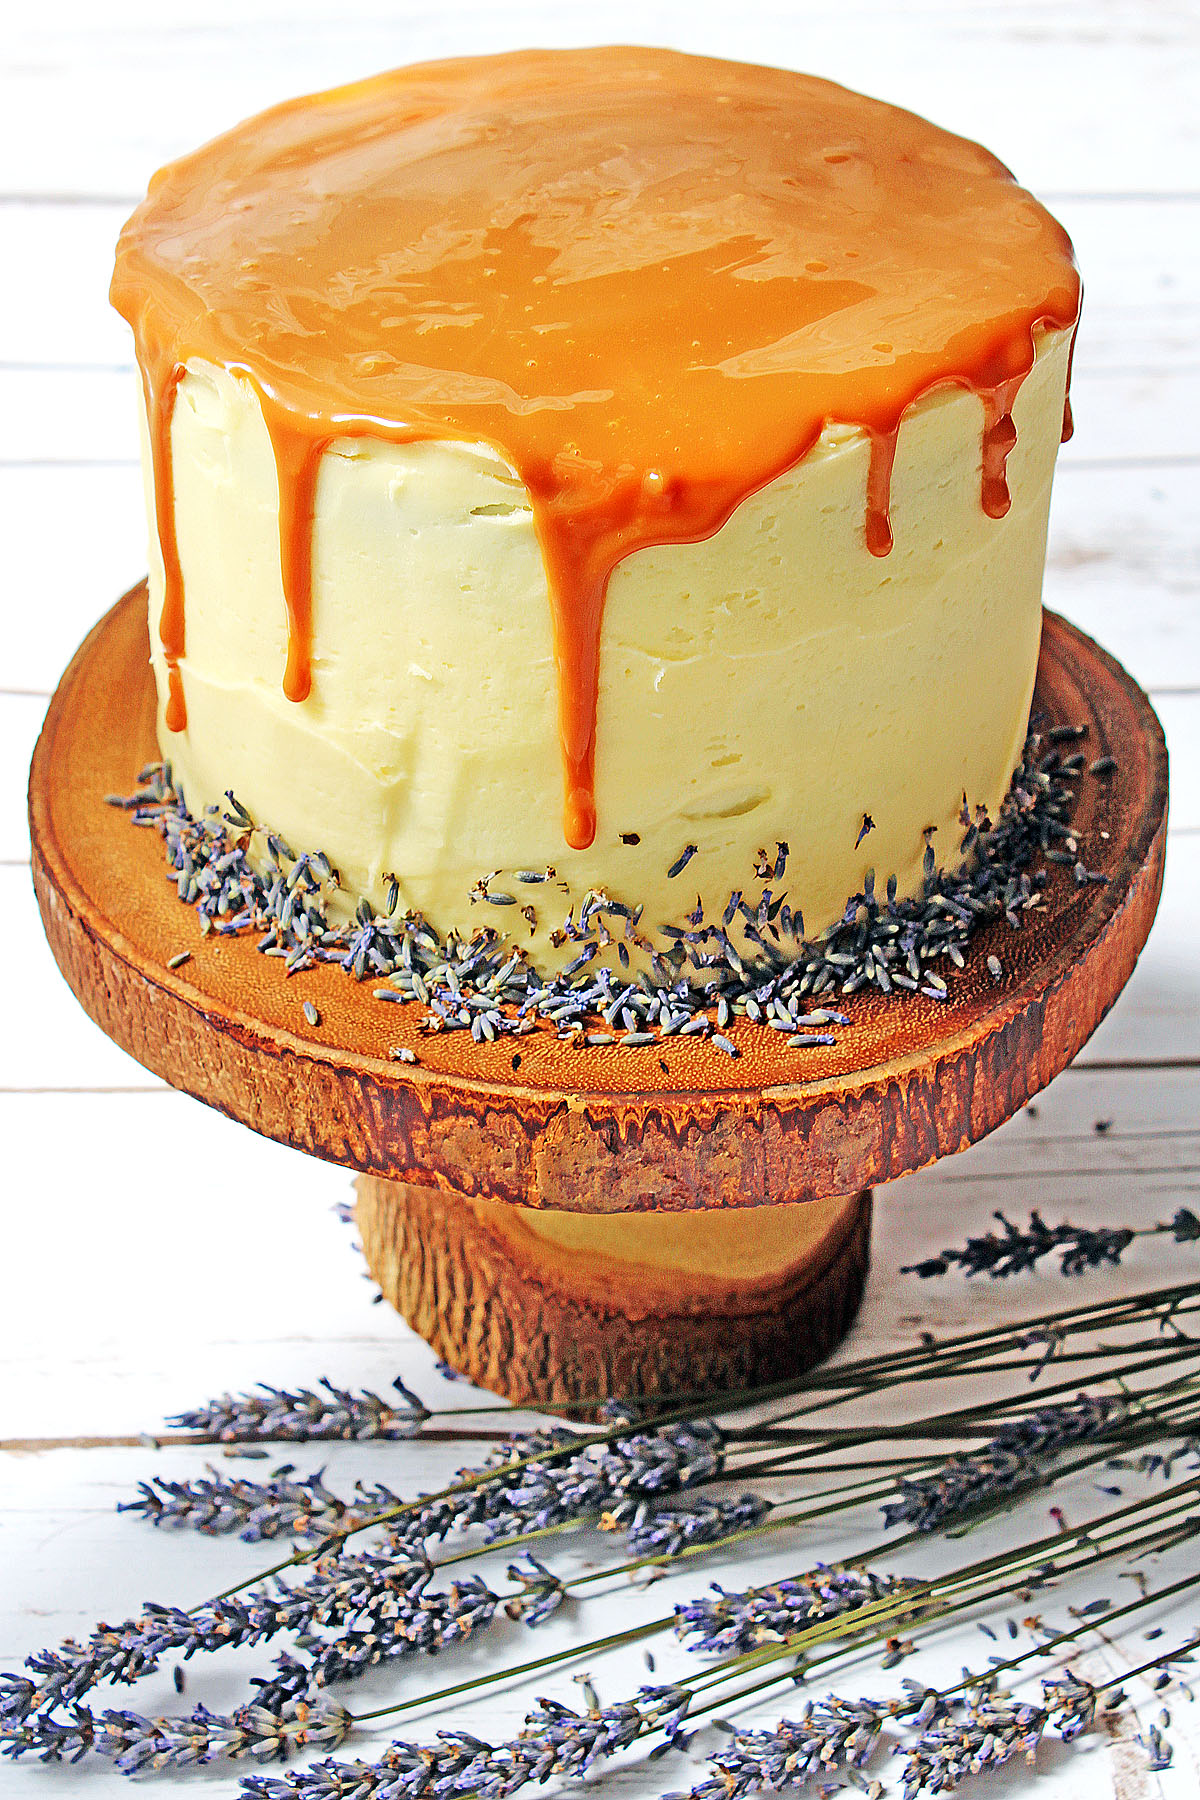 Lavender and Honey Layer Cake is a stunning cake perfect for any summer celebration! Bake it for your next garden party this summer holidays. Get the recipe at Supper in the Suburbs